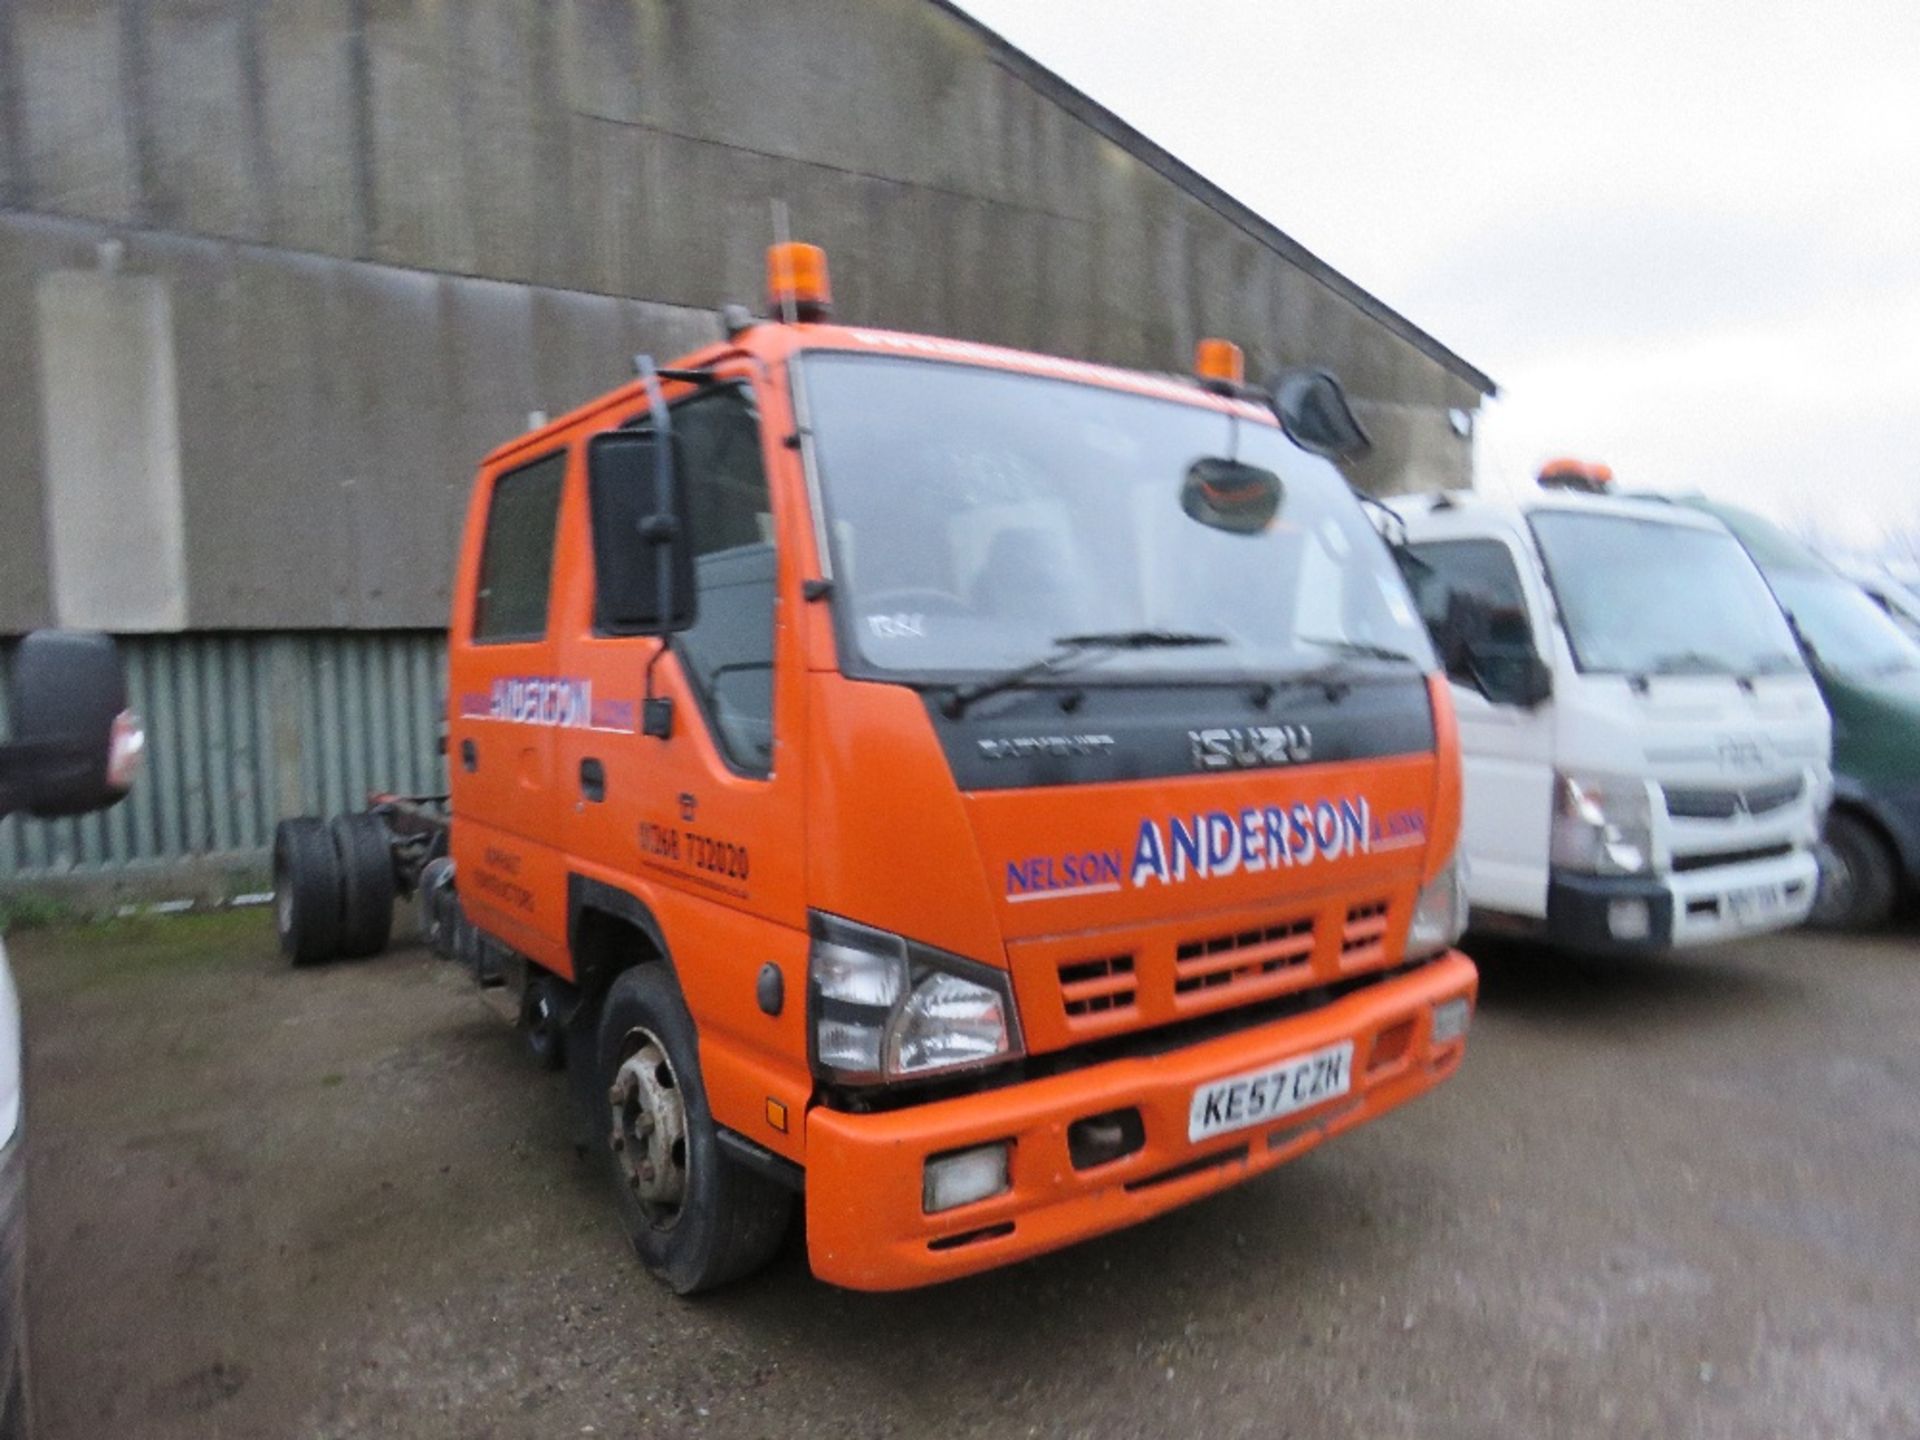 ISUZU DOUBLE CAB EASYSHIFT GEARBOX 7500KG RATED CHASSIS CAB LORRY. REG KE57 CZH. 12FT LENGTH OF CHAS